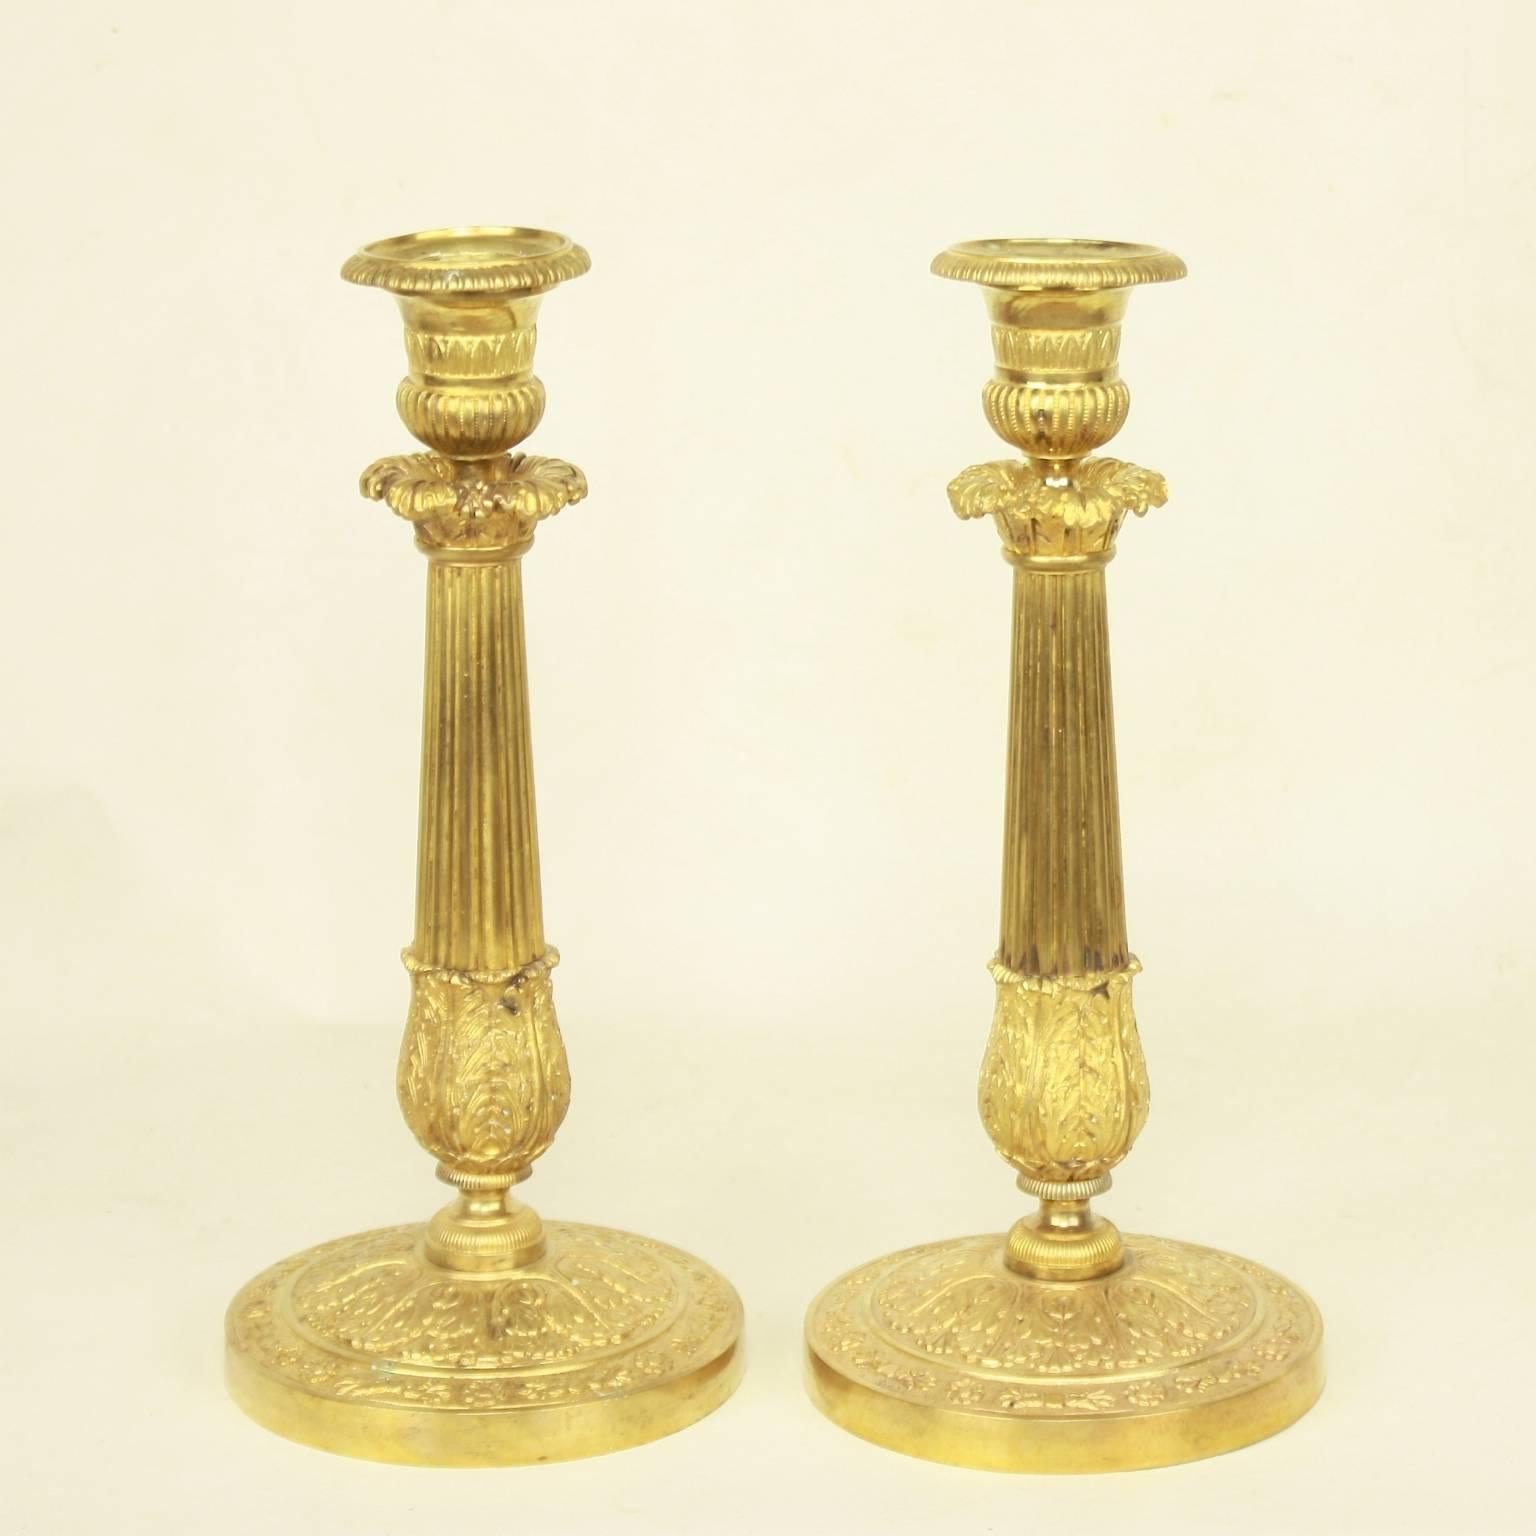 Pair of Empire gilt bronze candlesticks, each with a fluted stem, highlighted on top and bottom by finely chased foliate. The cannellure cast sockets with removable nozzles. The stem rests on a circular base accented by acanthus leaves and skirted